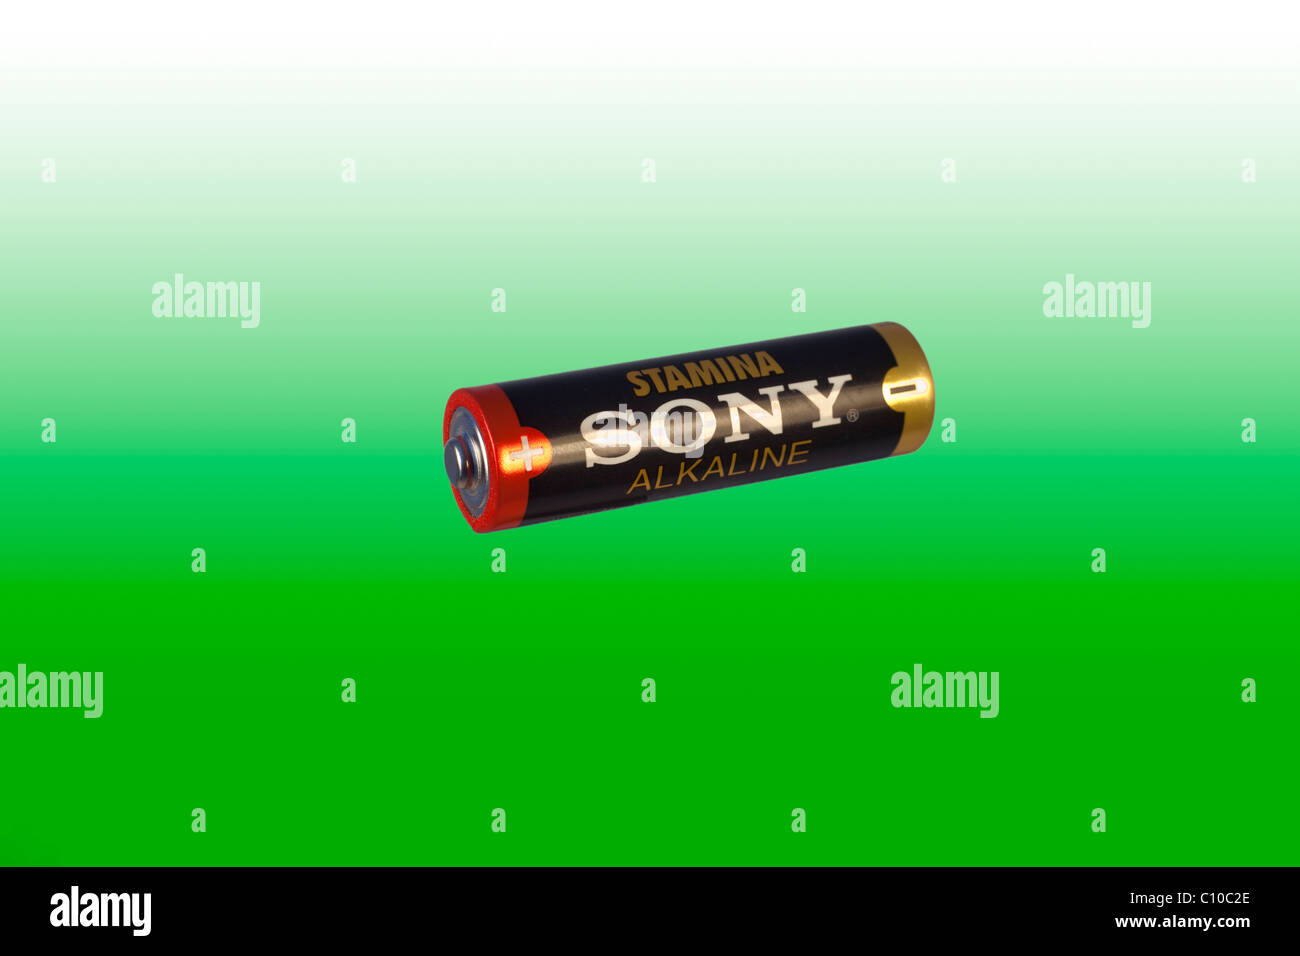 Small Battery High Resolution Stock Photography and Images - Alamy